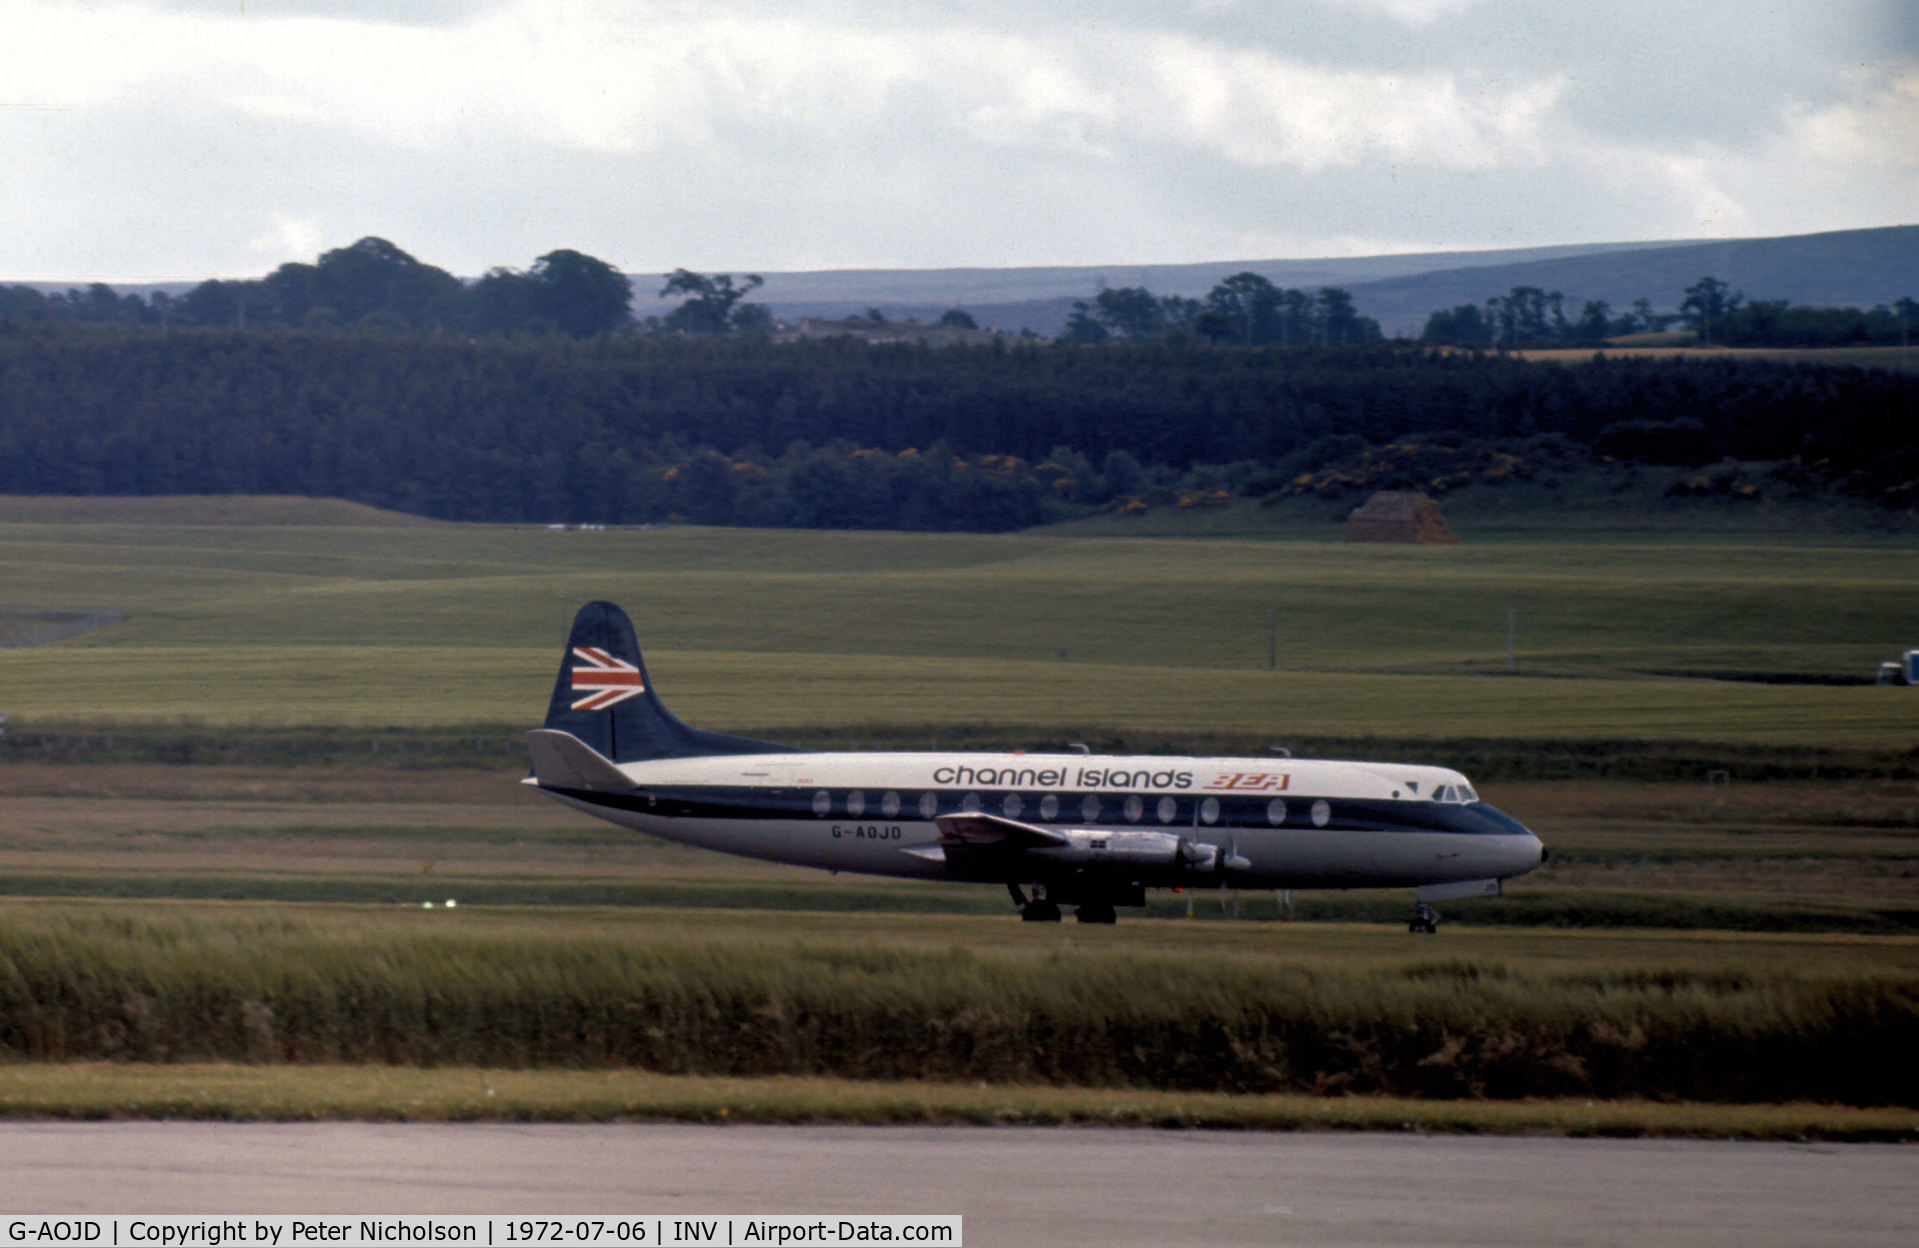 G-AOJD, 1956 Vickers Viscount 802 C/N 153, Viscount 802 of British European Airways Channel Islands Division as seen in the Summer of 1972 at Inverness.